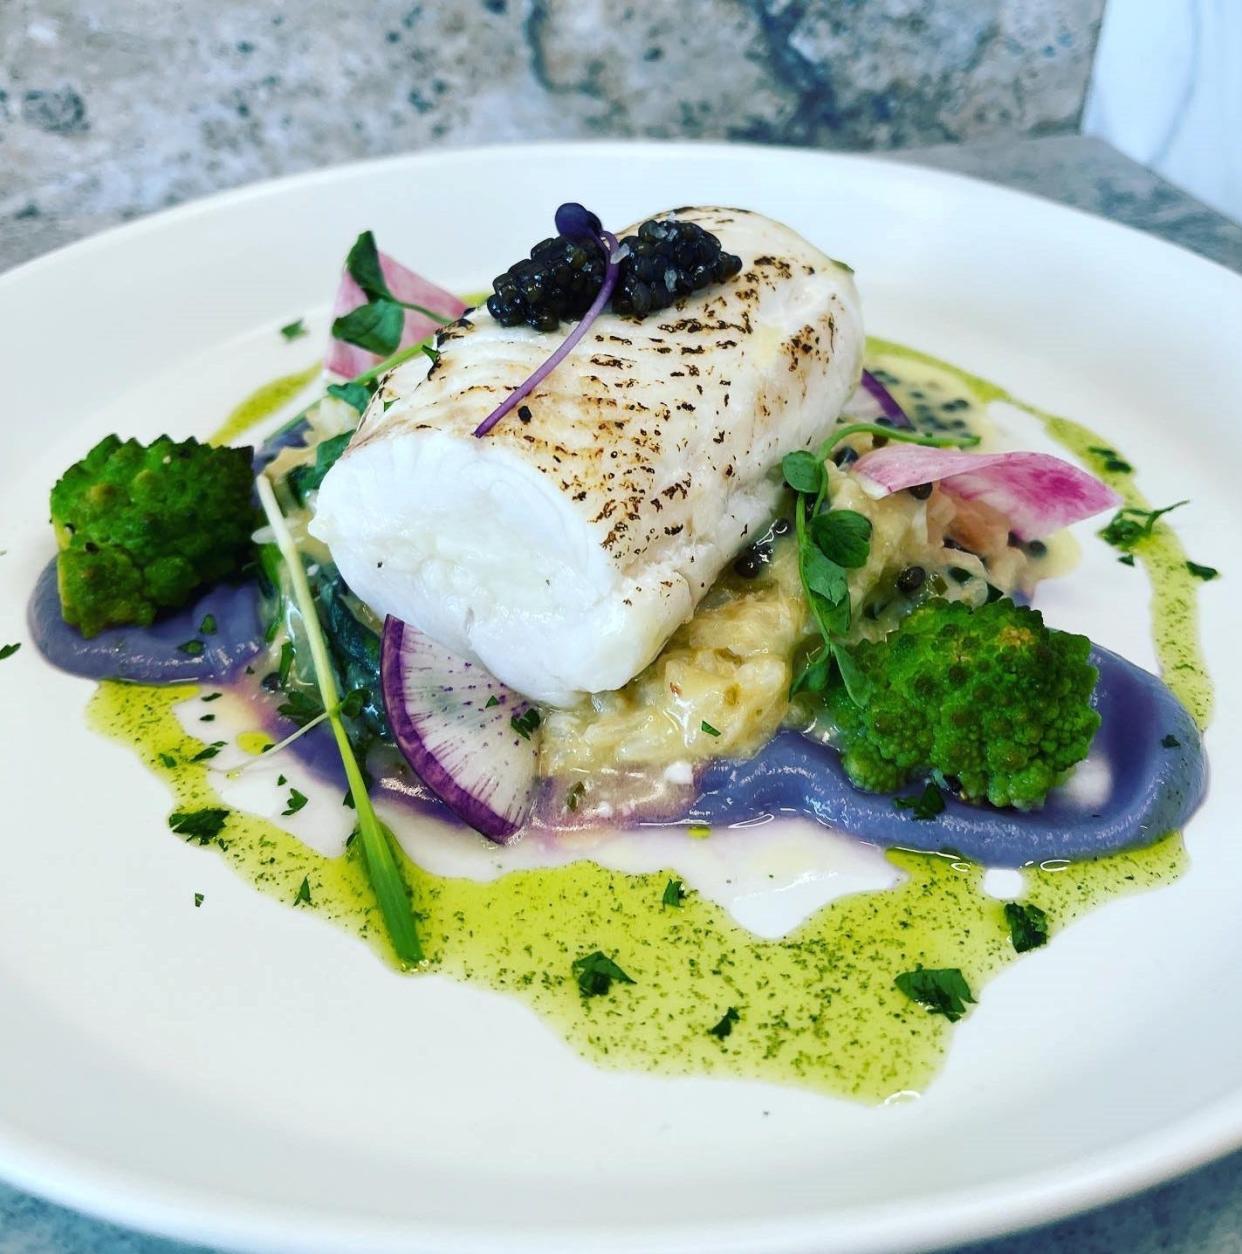 Chef Ryan Duffy, of The Boat Landing Restaurant in Sunset Beach, prepared this lionfish dish for the 2023 Chef Showdown competition hosted by the N.C. Restaurant & Lodging Association.